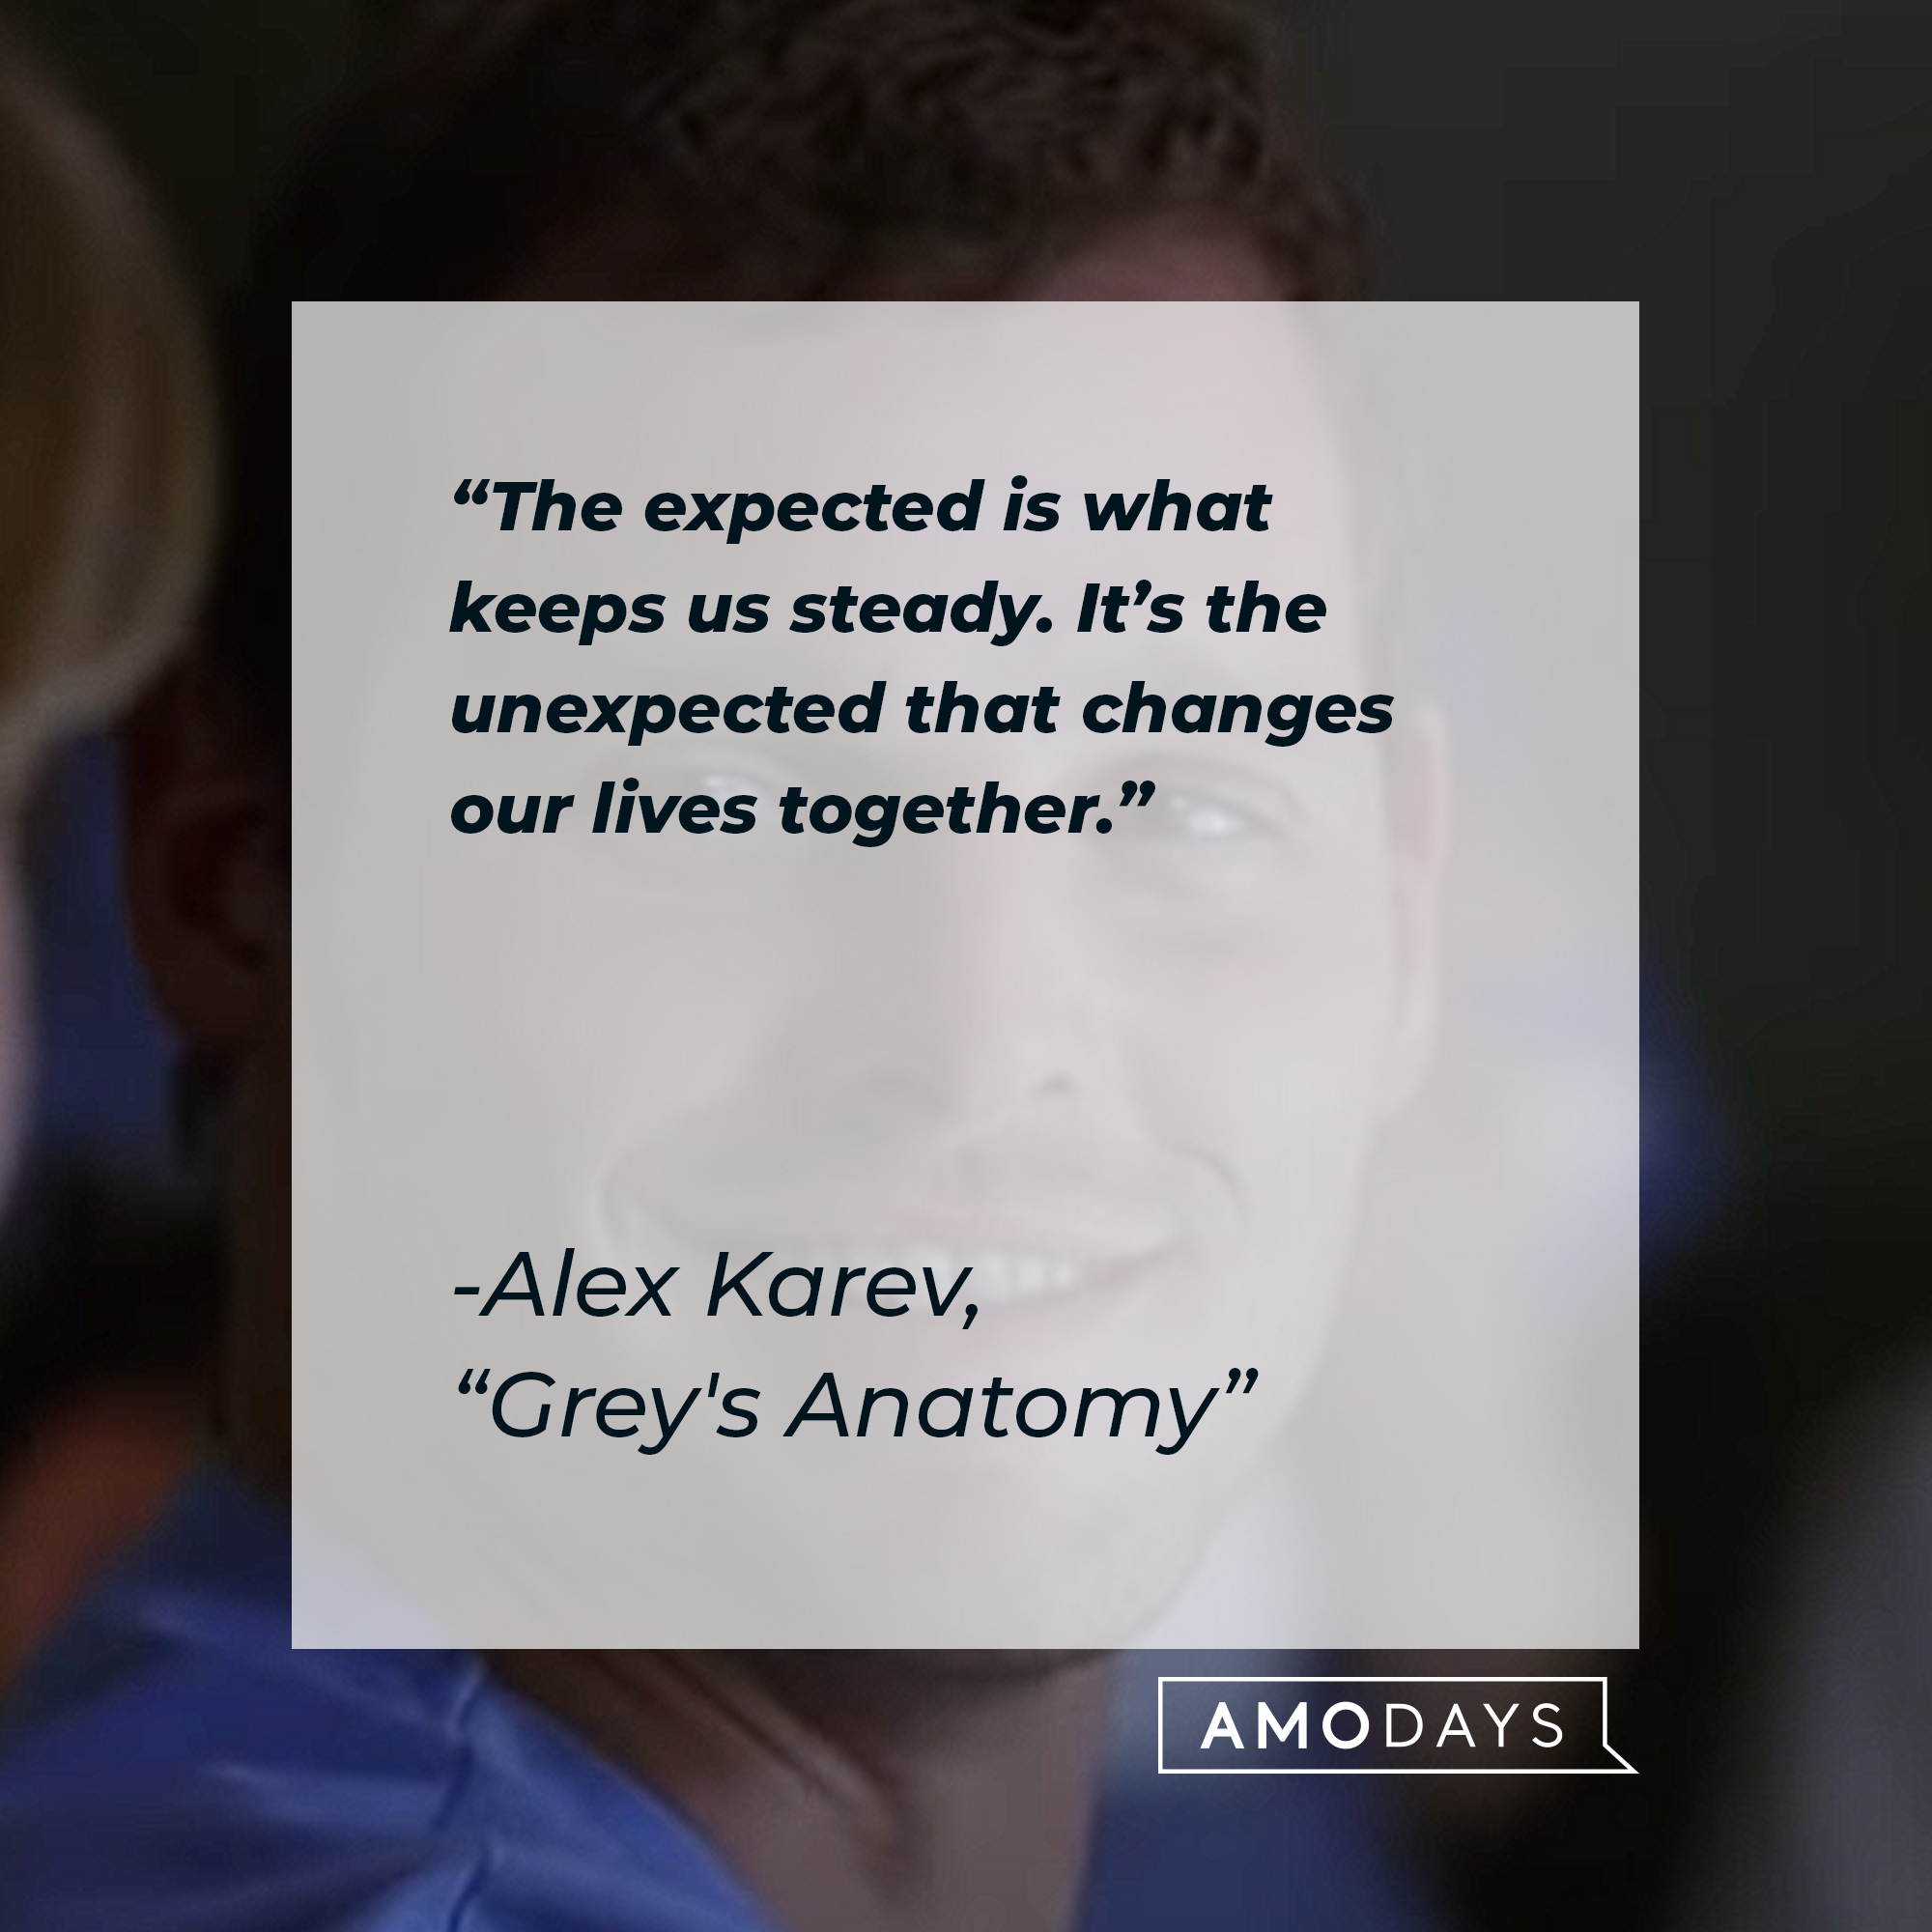 Alex Karev’s quote from "Grey's Anatomy": “The expected is what keeps us steady. It’s the unexpected that changes our lives together.” | Source: youtube.com/ABCNetwork